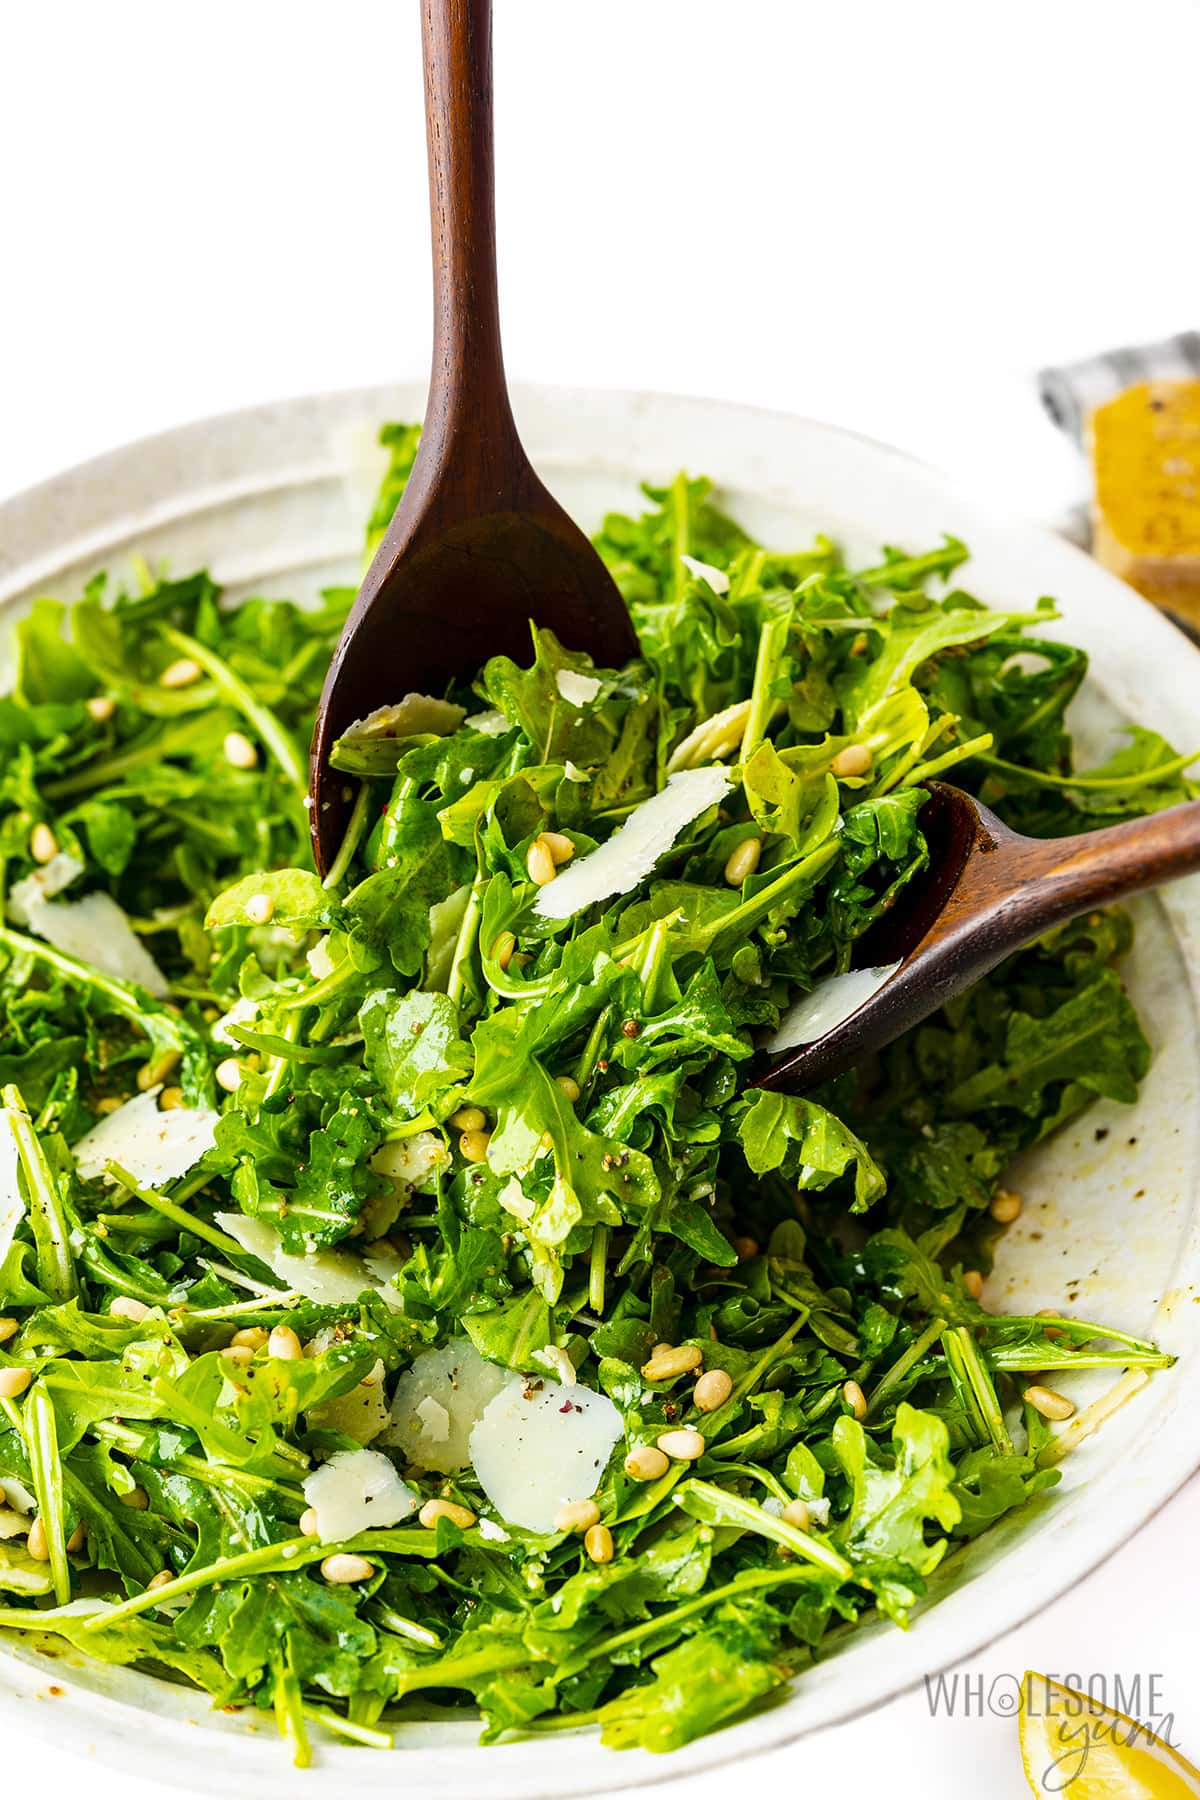 Arugula salad served with wooden spoons.